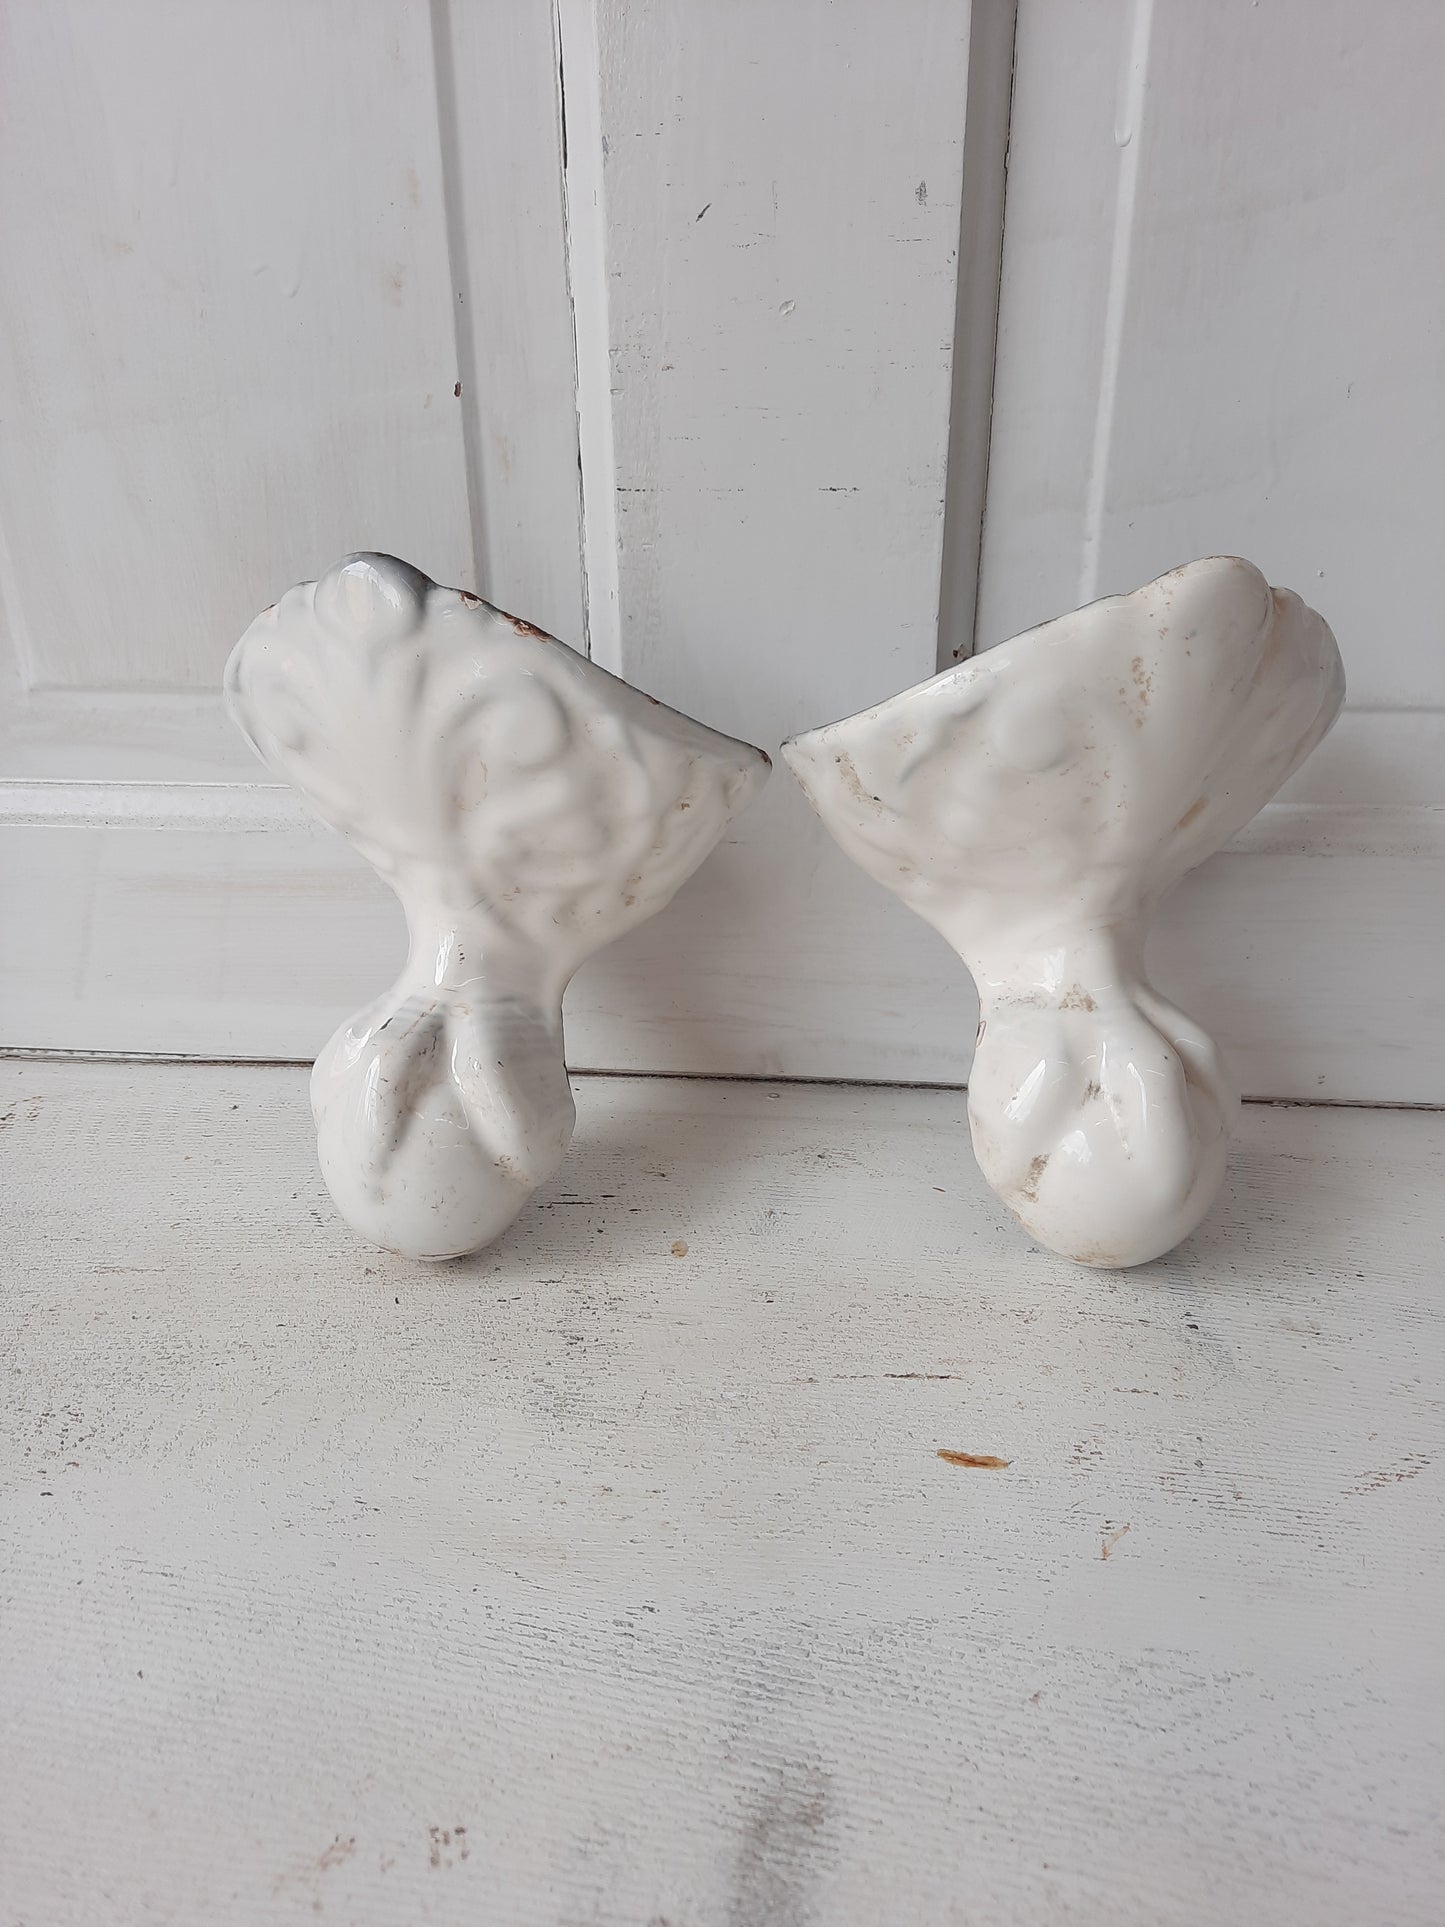 Antique Pair of Cast Iron and Porcelain Ball and Claw Design Bathtub Feet #070102